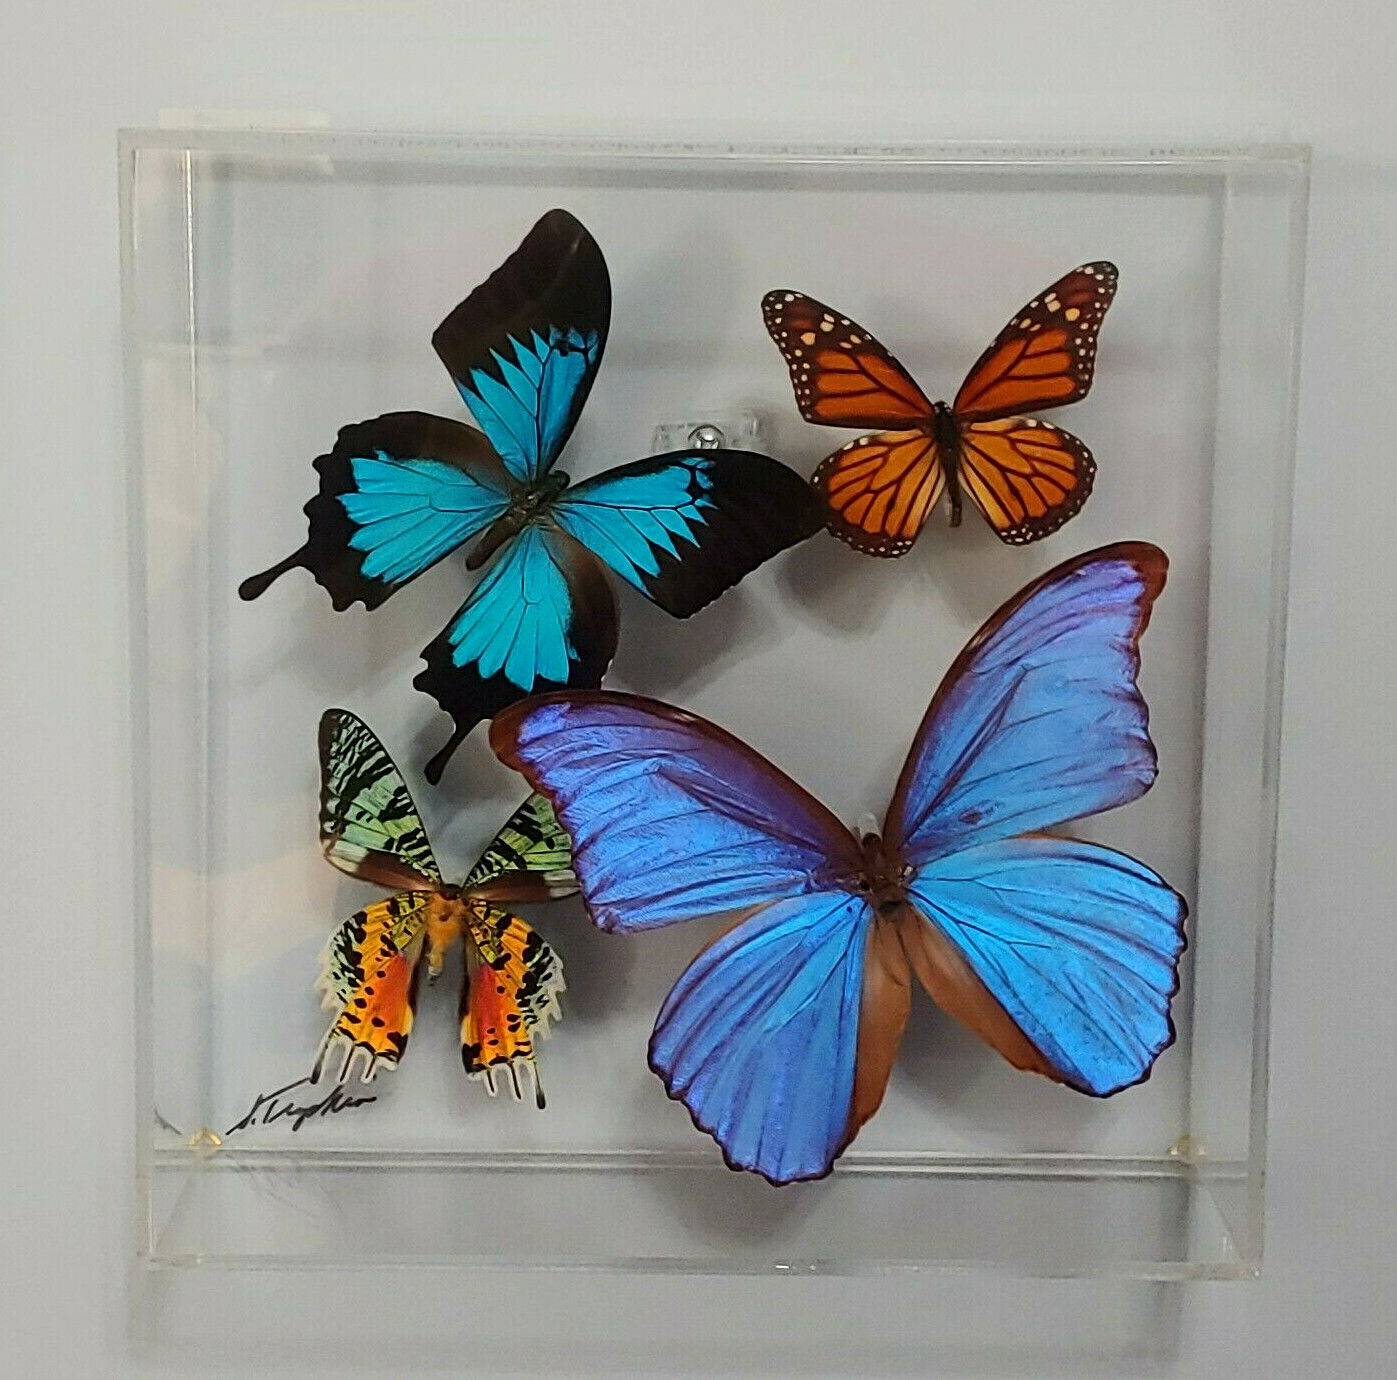 Ulysses, Monarch, Blue Morpho Butterfly & Sunset Moth in Display Signed   